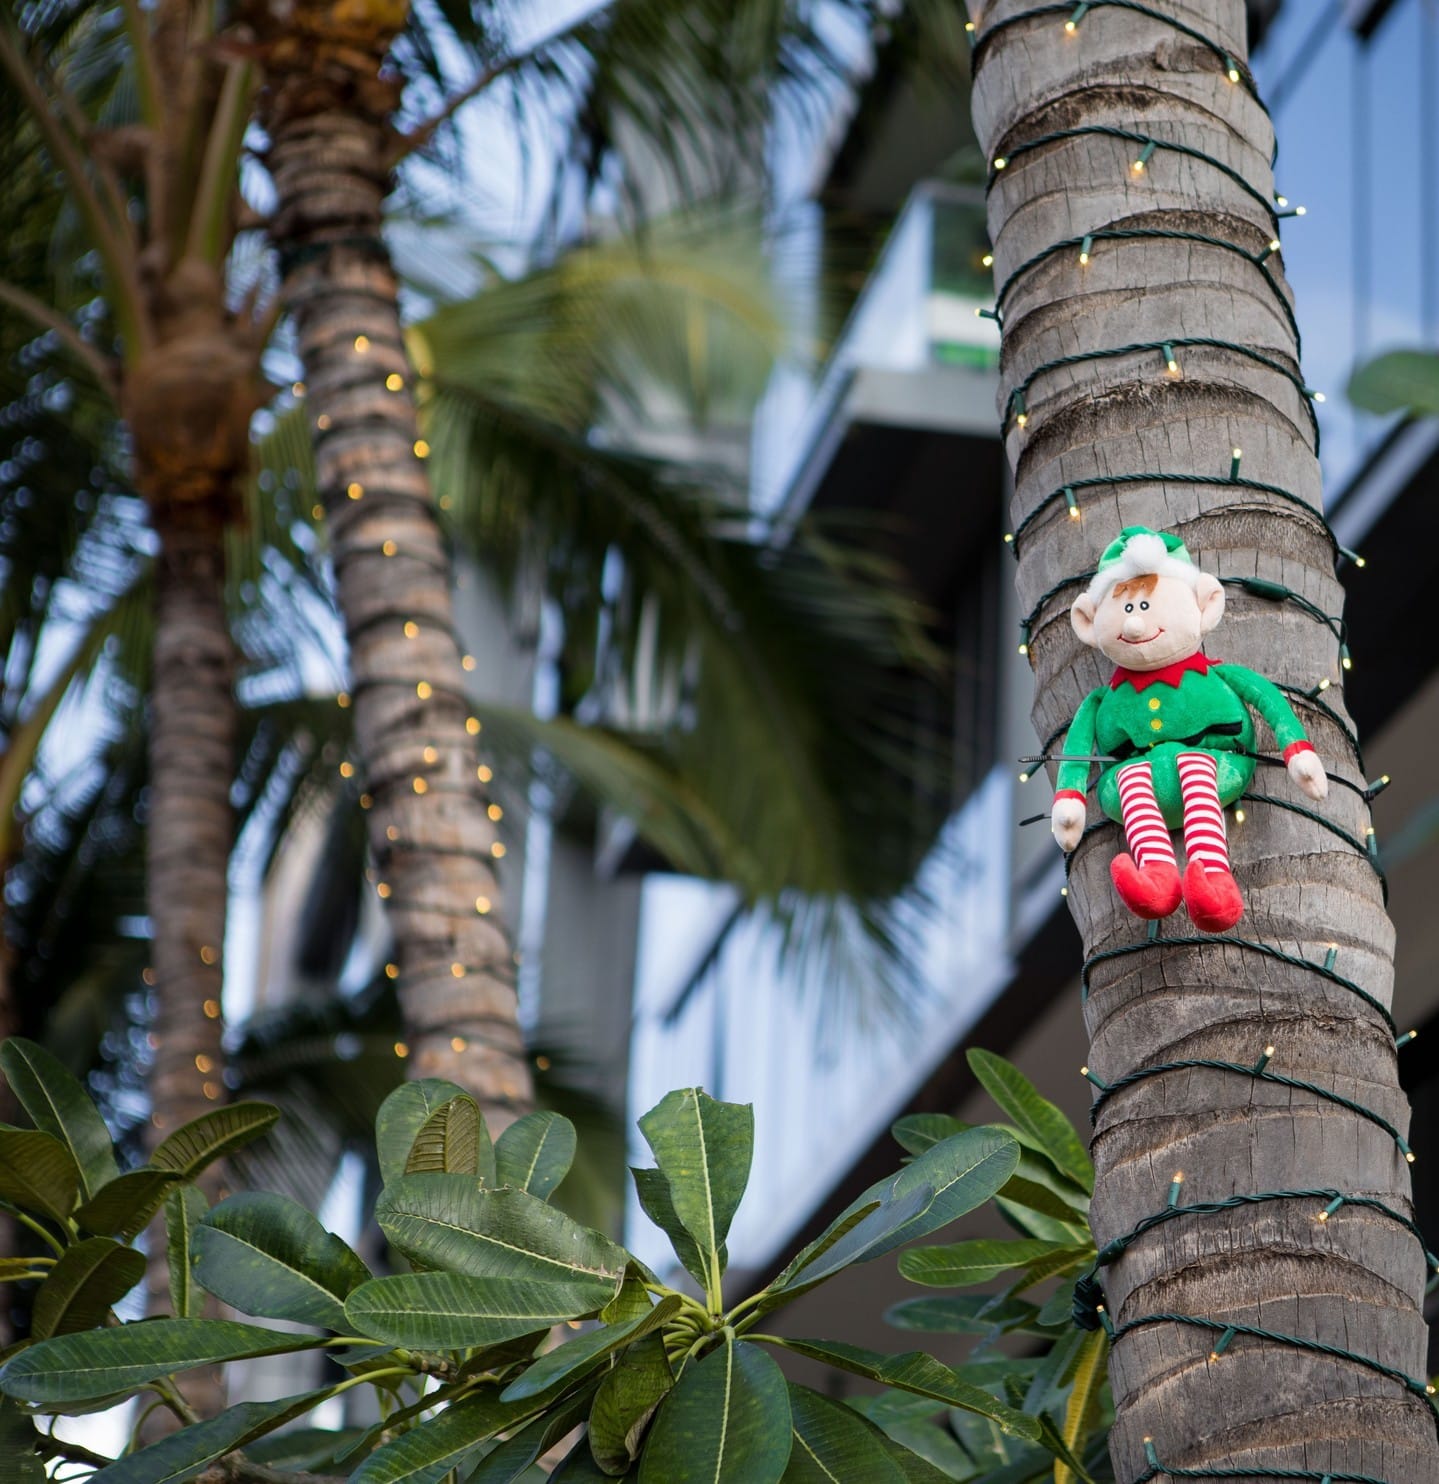 Mahalo for participating in our Elf Scavenger Hunt! Congratulations to the 5 lucky winners who will receive a $100 gift card to the Ward Village retailer of their choice. The elves look forward to seeing you all again next year!